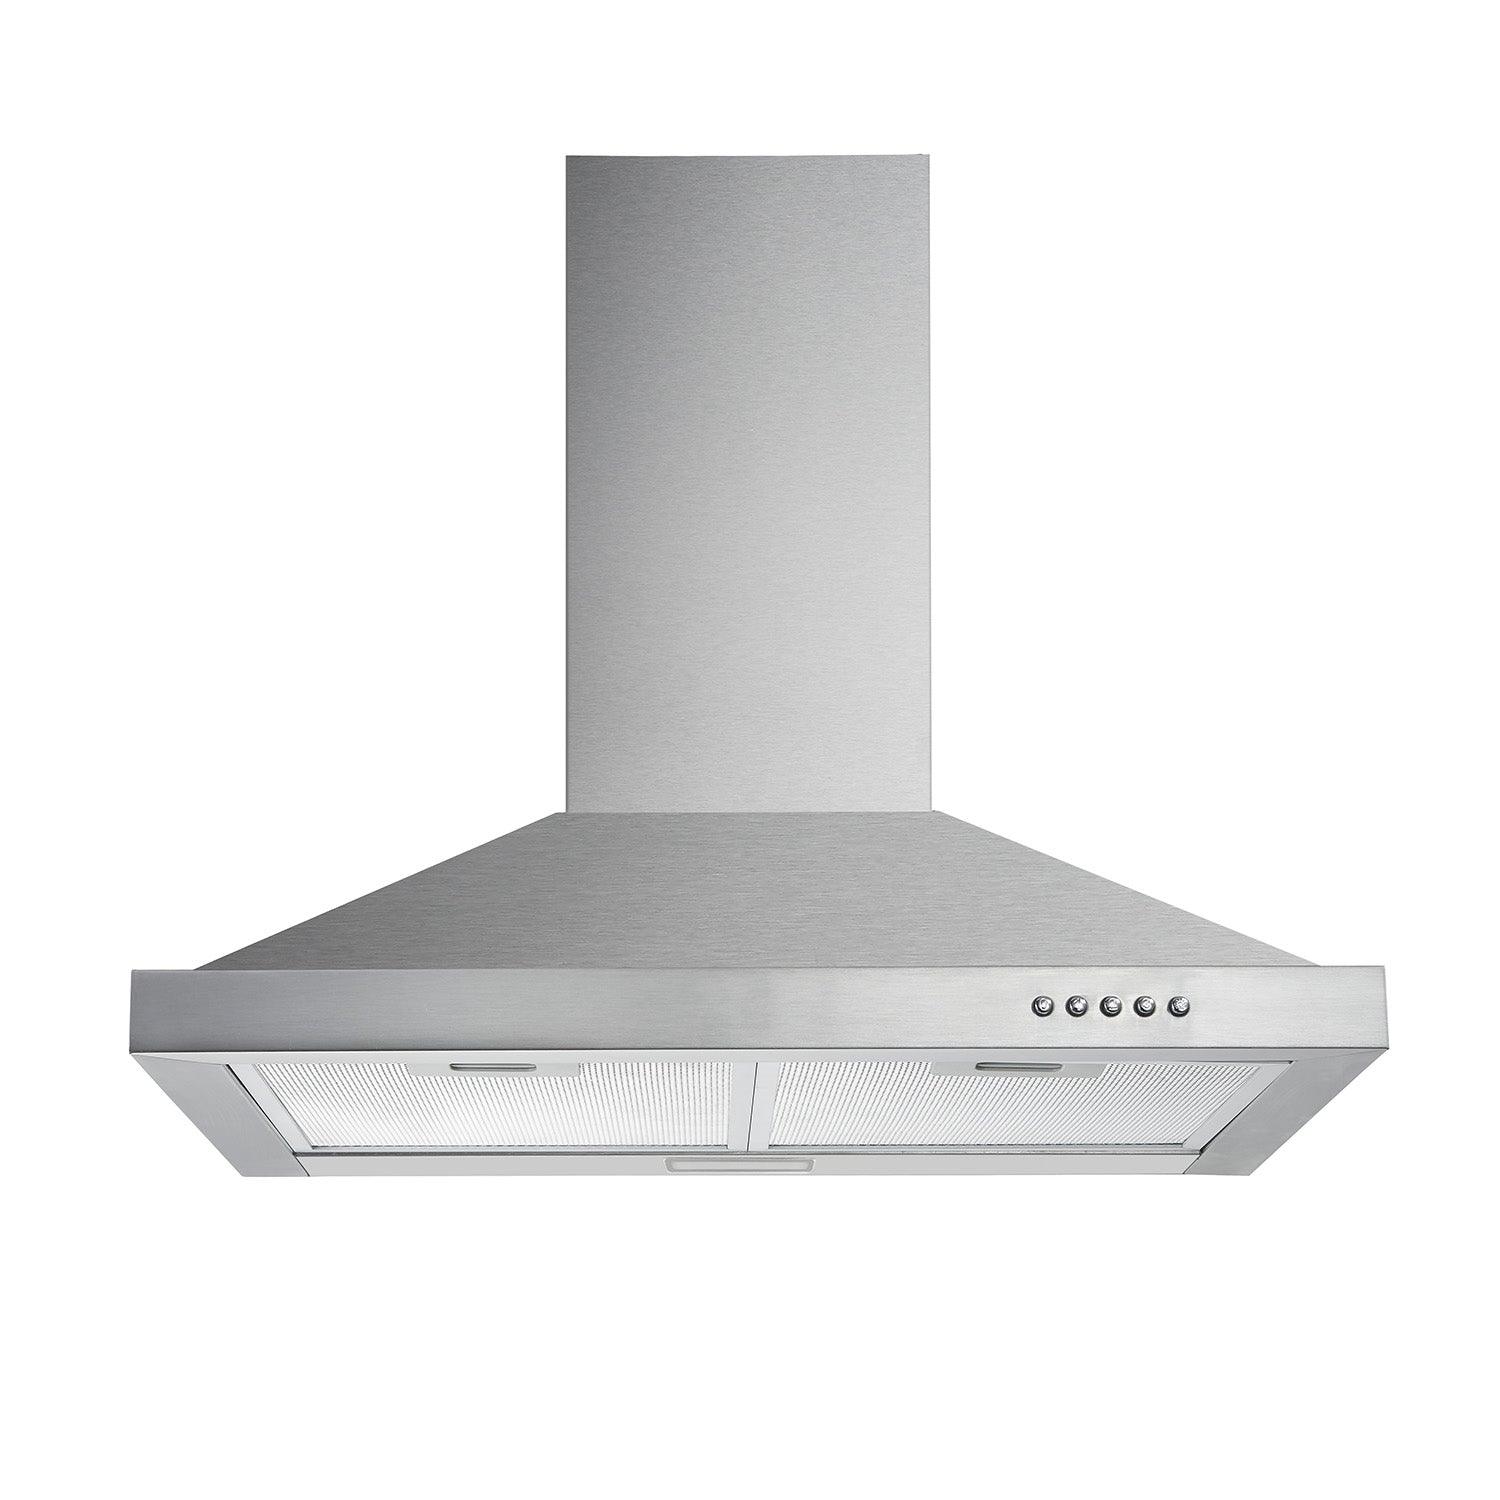 Range Hood 30 inches,Stainless Steel Wall Mount Range Hood,Vent Hood 30 inch  w/Control,Ducted/Ductless Convertible - AliExpress